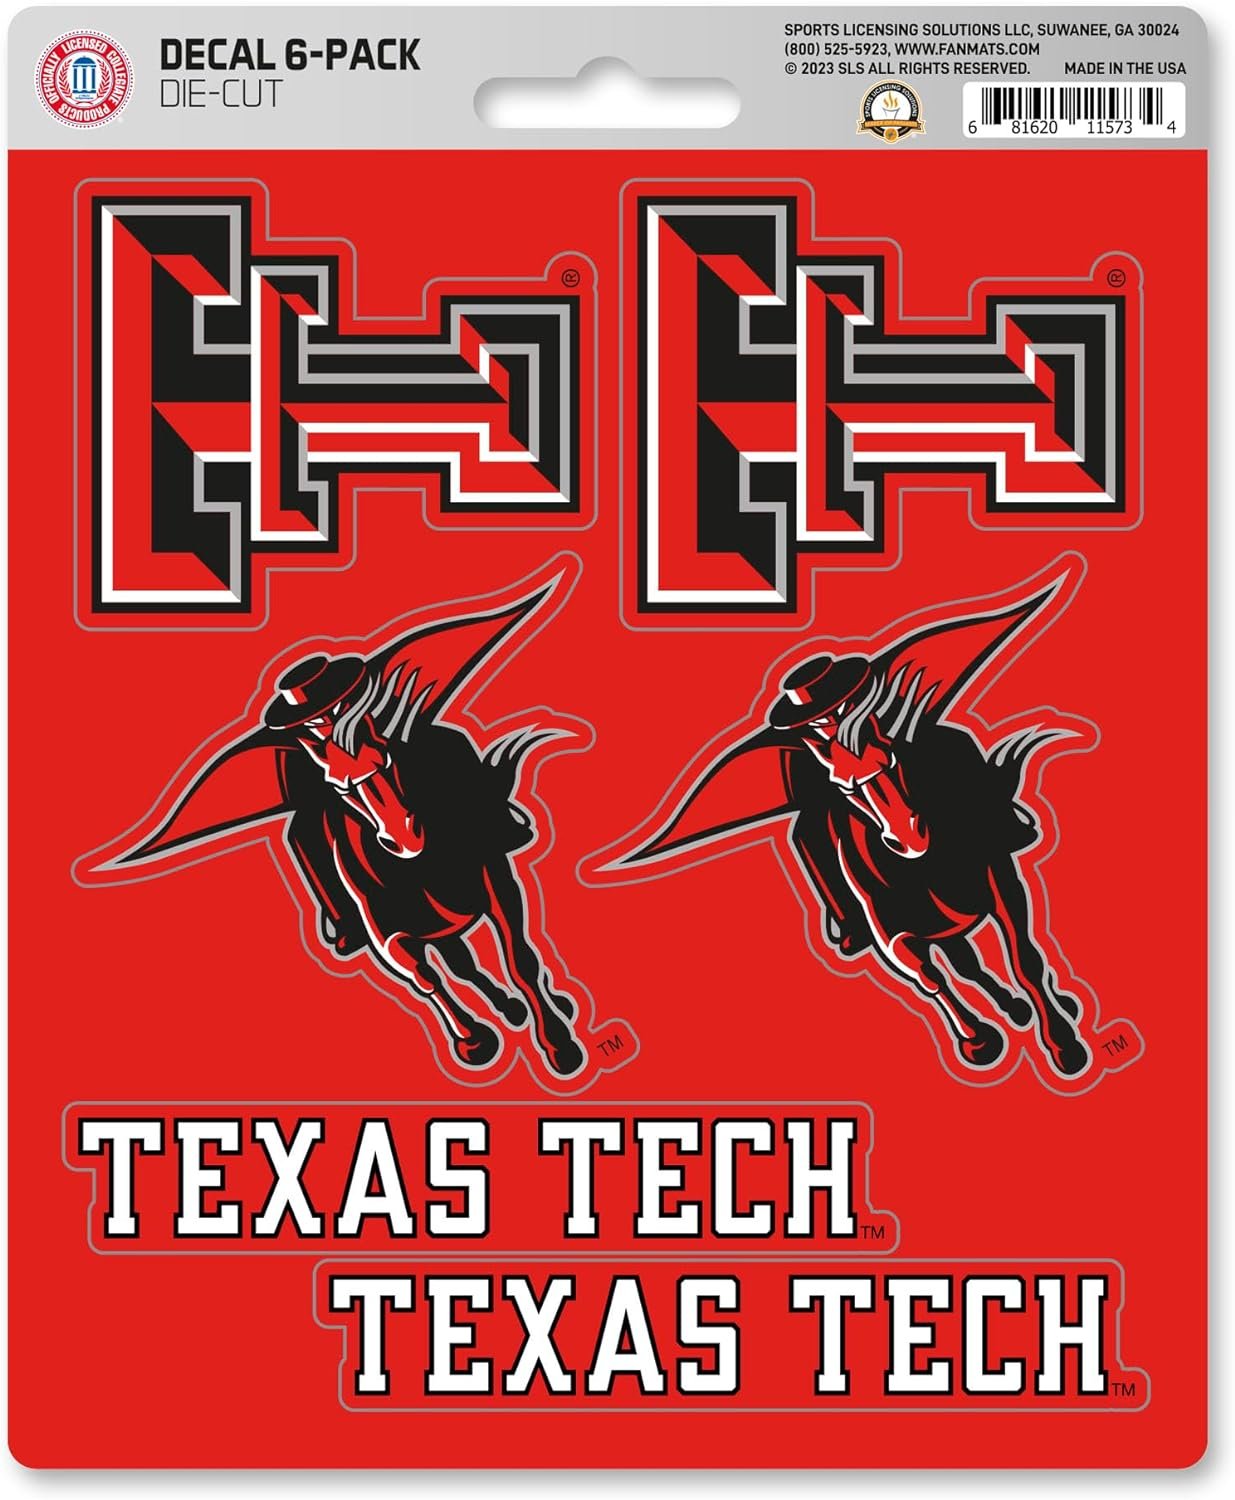 Texas Tech University Red Raiders 6-Piece Decal Sticker Set, 5x6 Inch Sheet, Gift for football fans for any hard surfaces around home, automotive, personal items